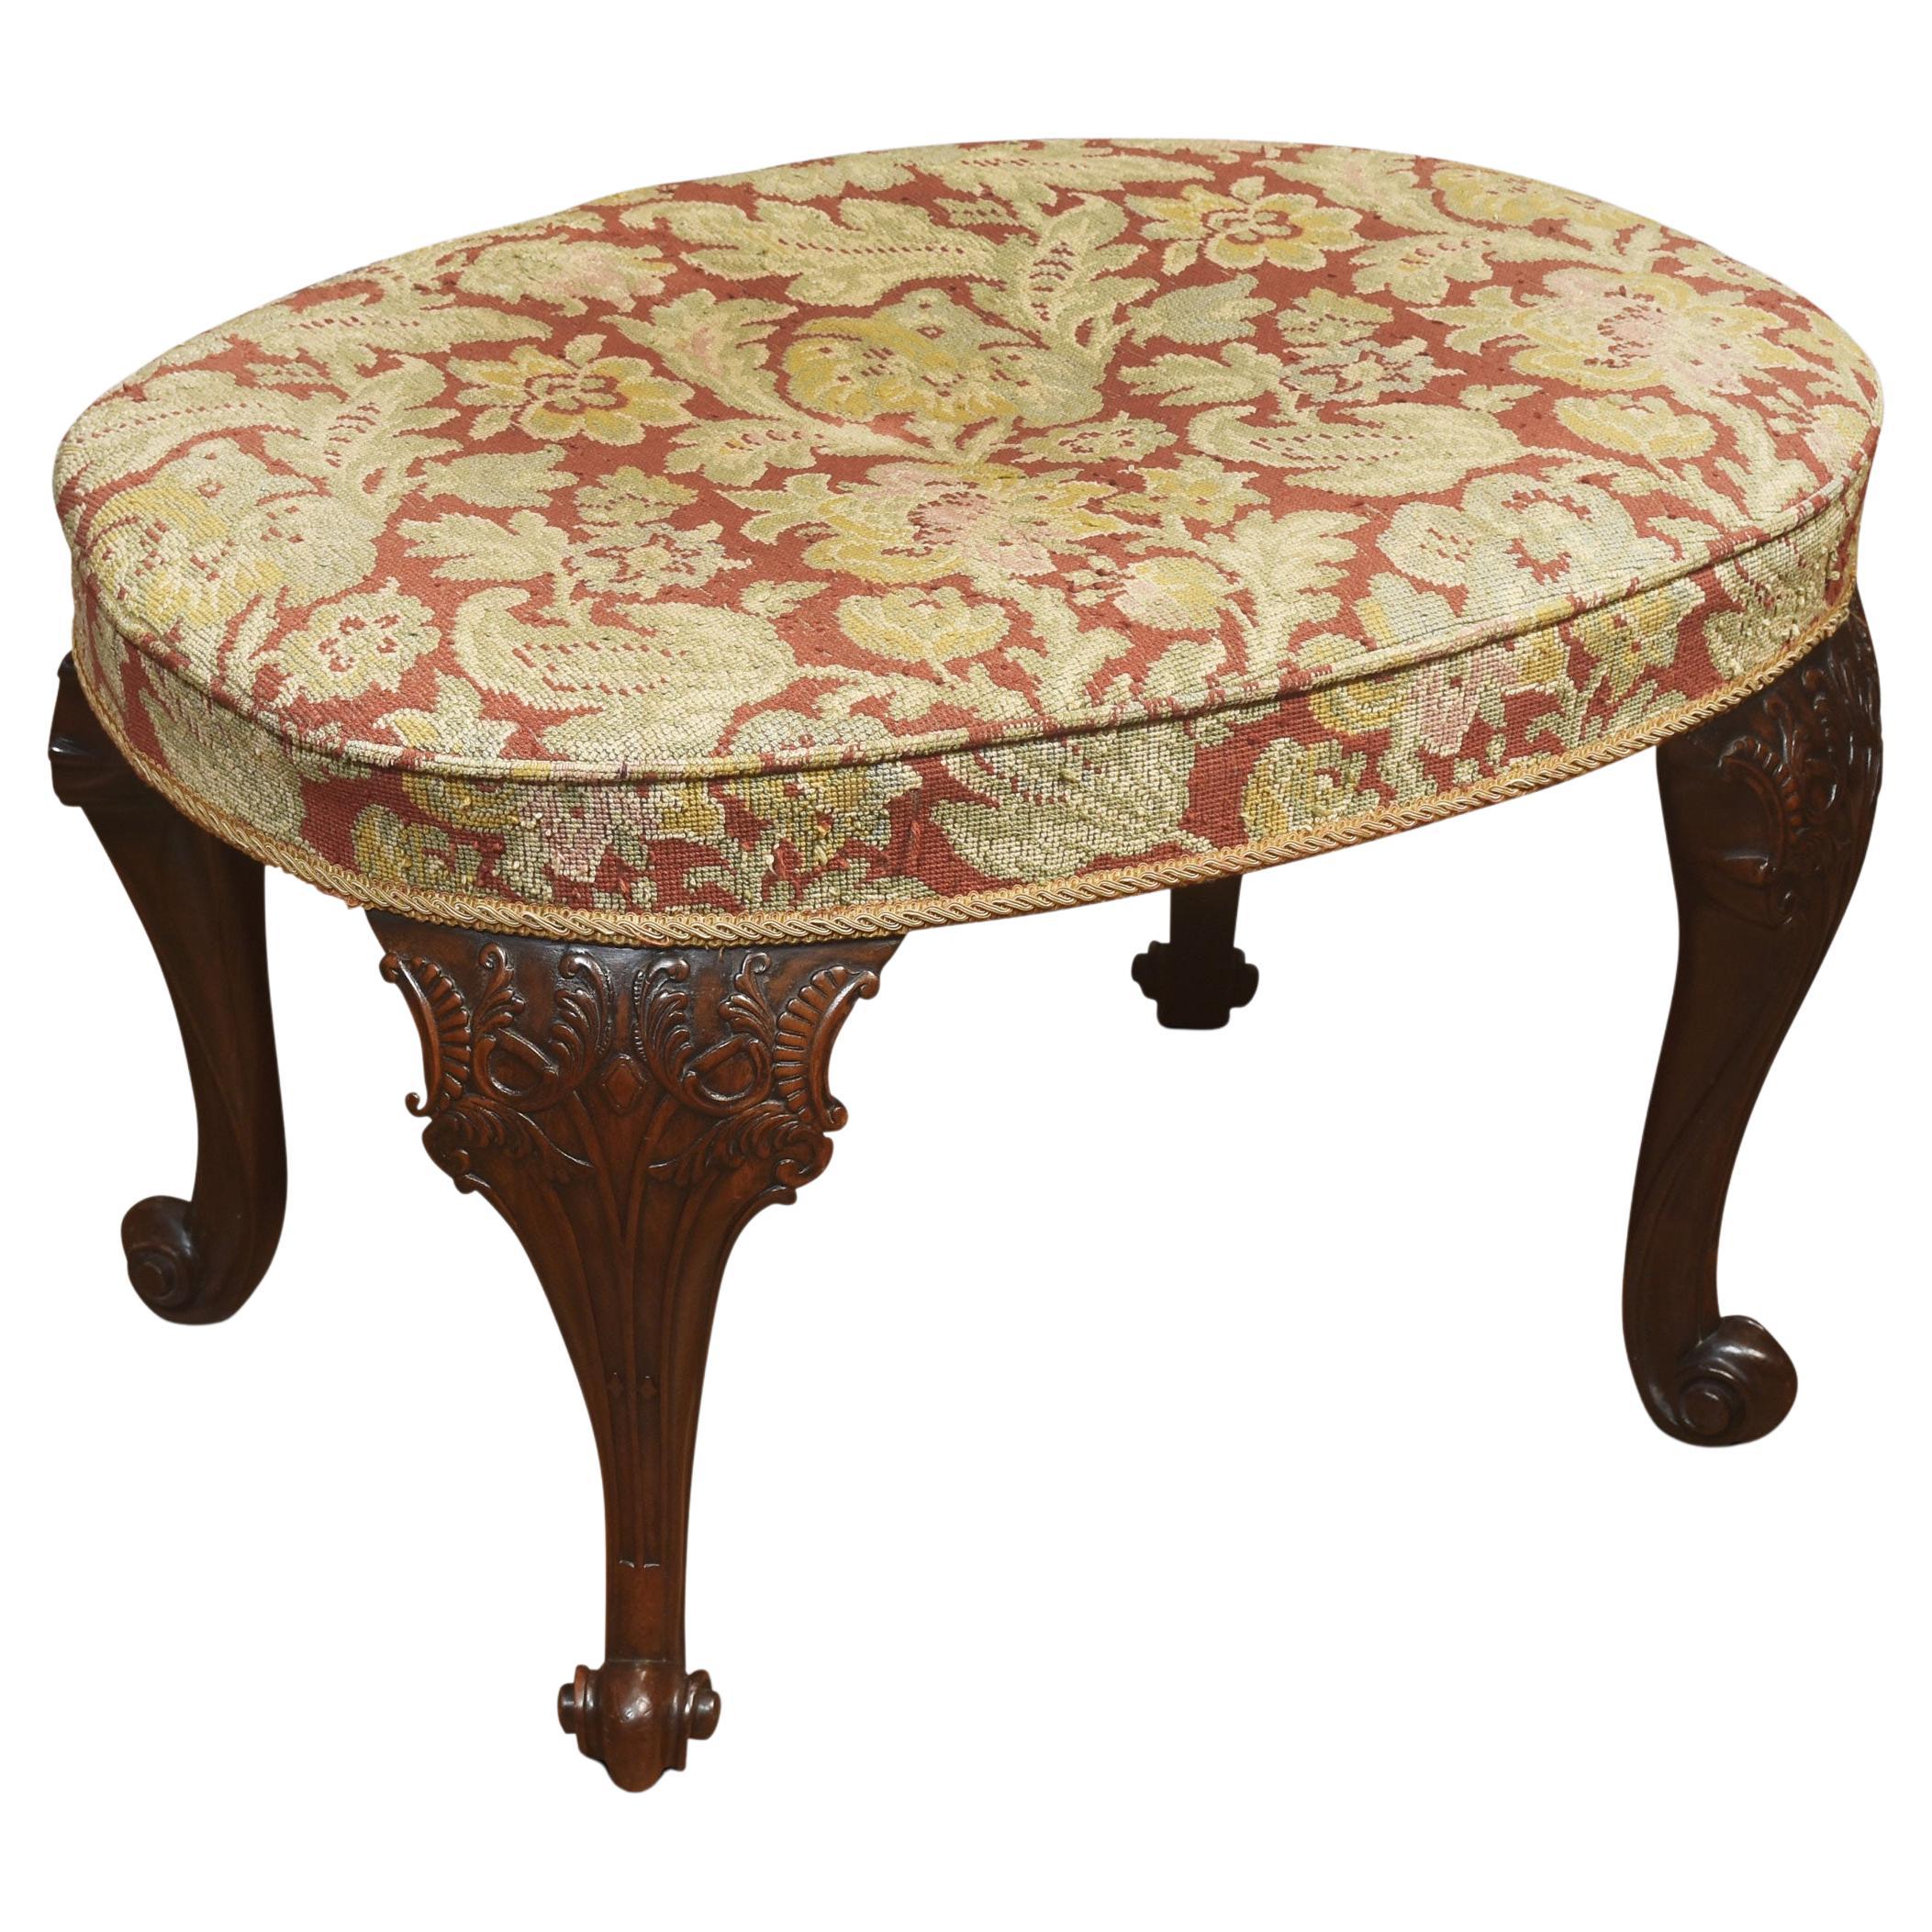 George II Style Tapestry Upholstered Stool